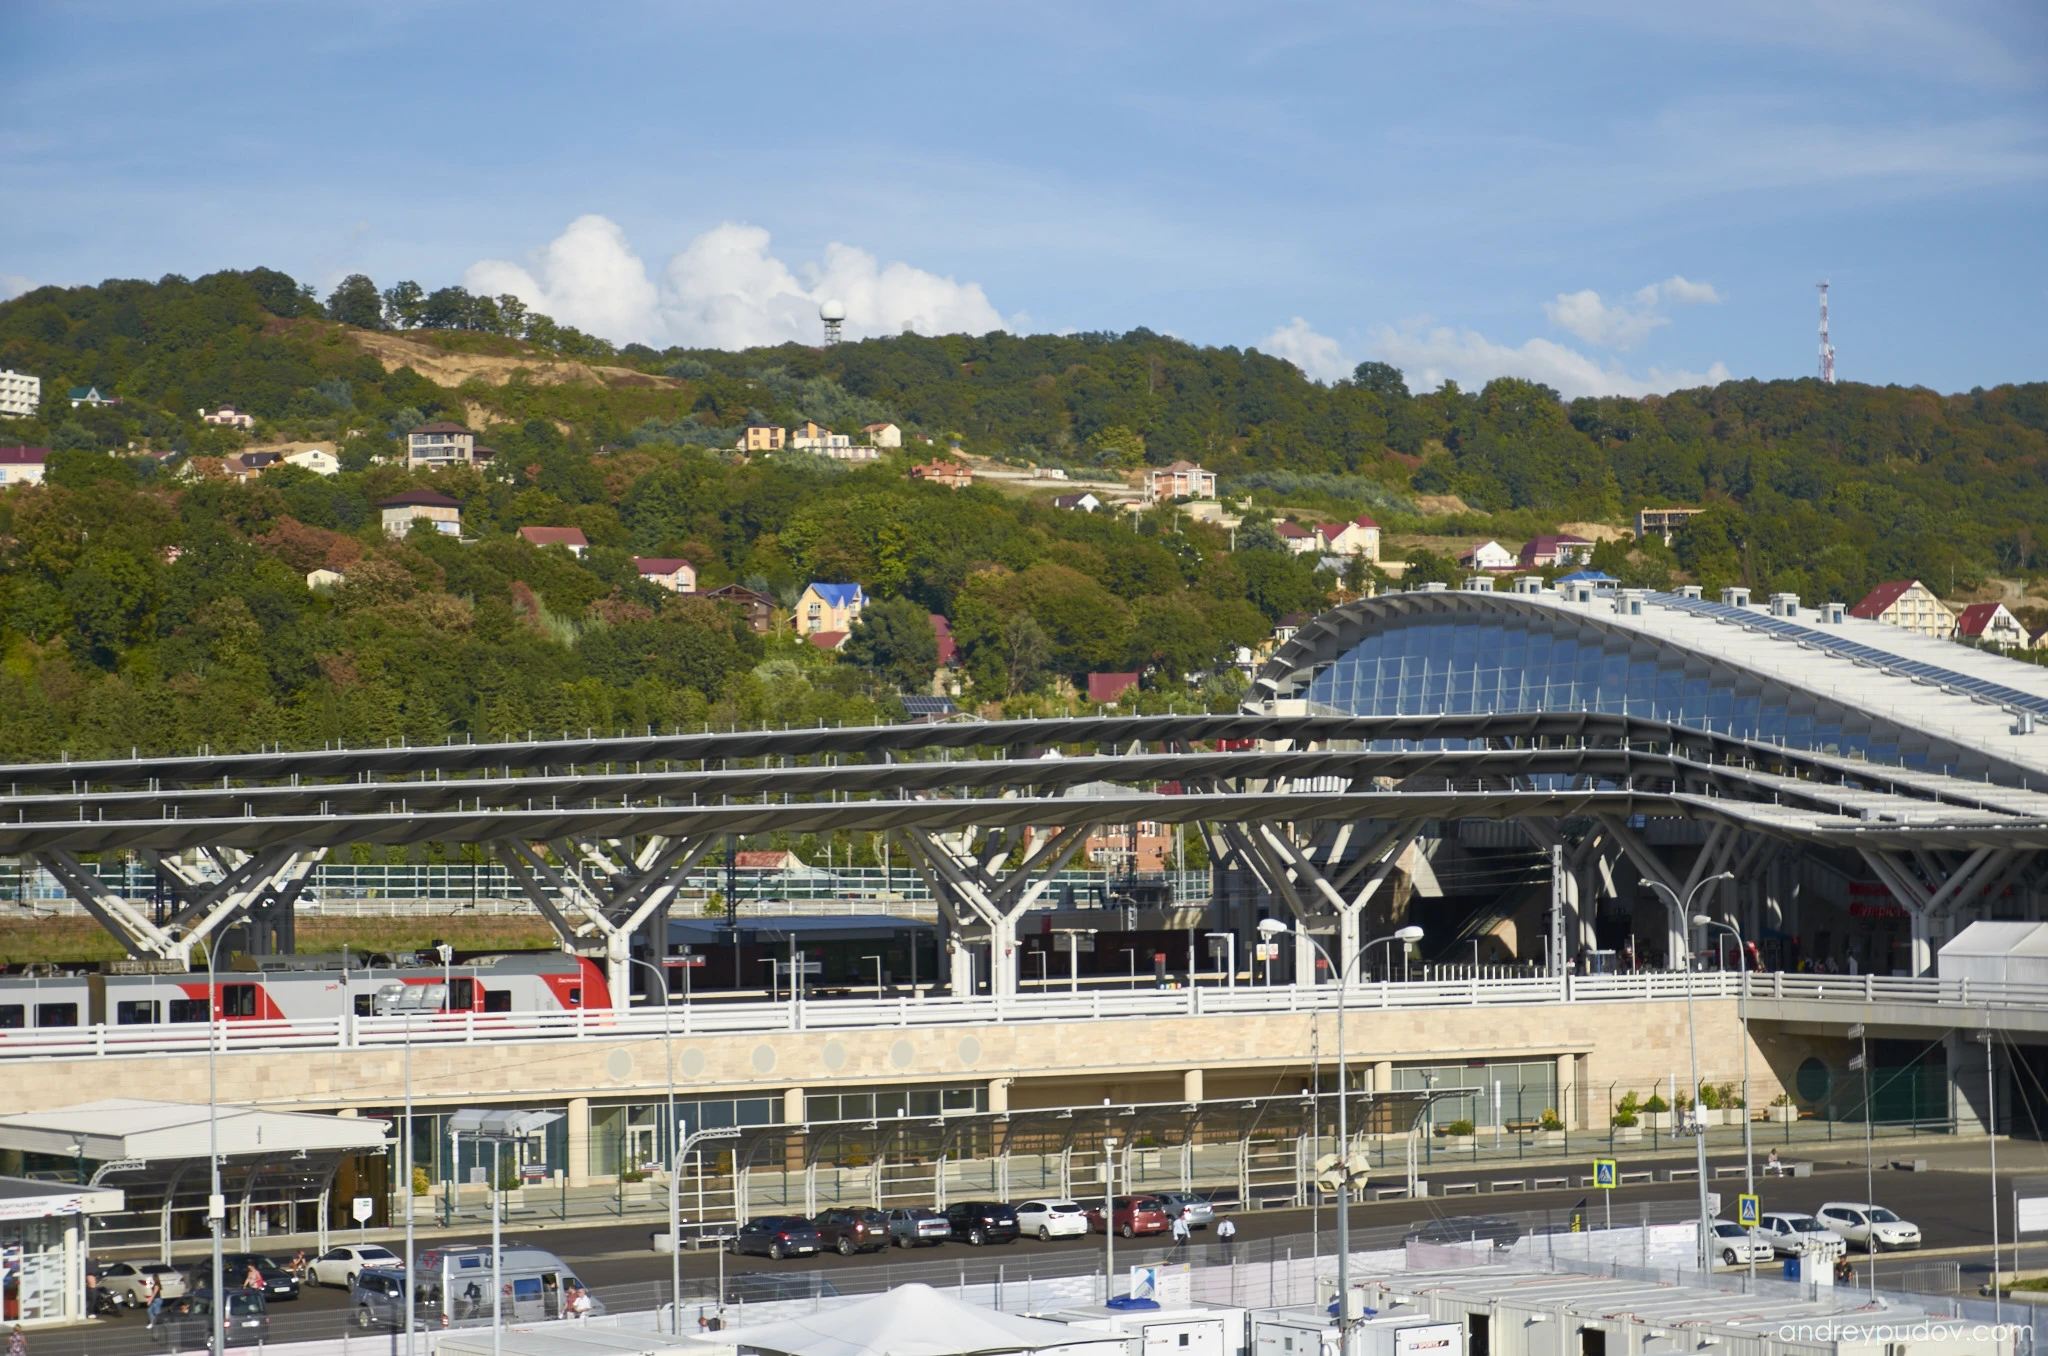 2015 Formula 1 Russian Grand Prix - Imeretinsky Kurort Railway Station

The railway station of the North Caucasus Railway is located in the Adler district of Sochi. The station was built for the 2014 Winter Olympics as Olympic Park and was the main transport hub of Olympic Park, the coastal cluster. During the Olympics, 26 pairs of trains departed daily from the station to Krasnaya Polyana railway station where the remainder of the Olympic events occurred.

On 15 March 2016, the station was renamed Imeretinsky Kurort.